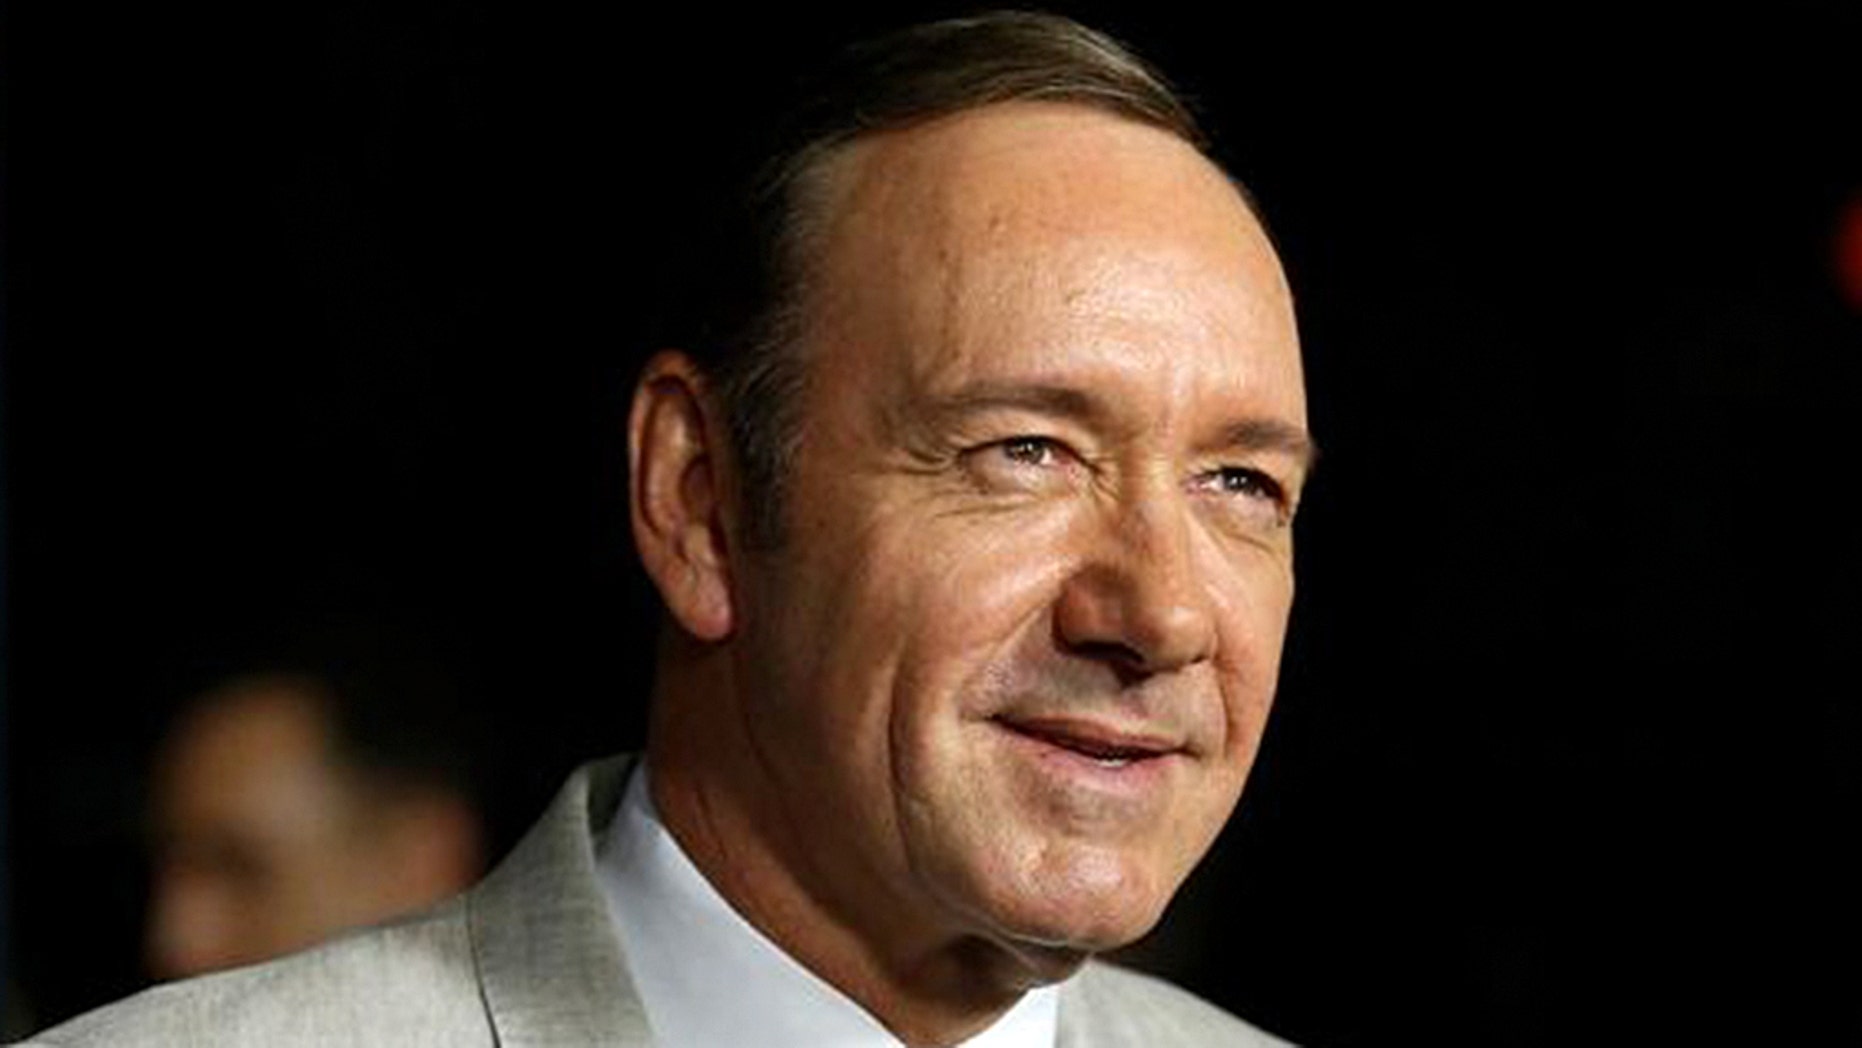 Kevin Spacey Facing 3 New Sexual Assault Allegations In